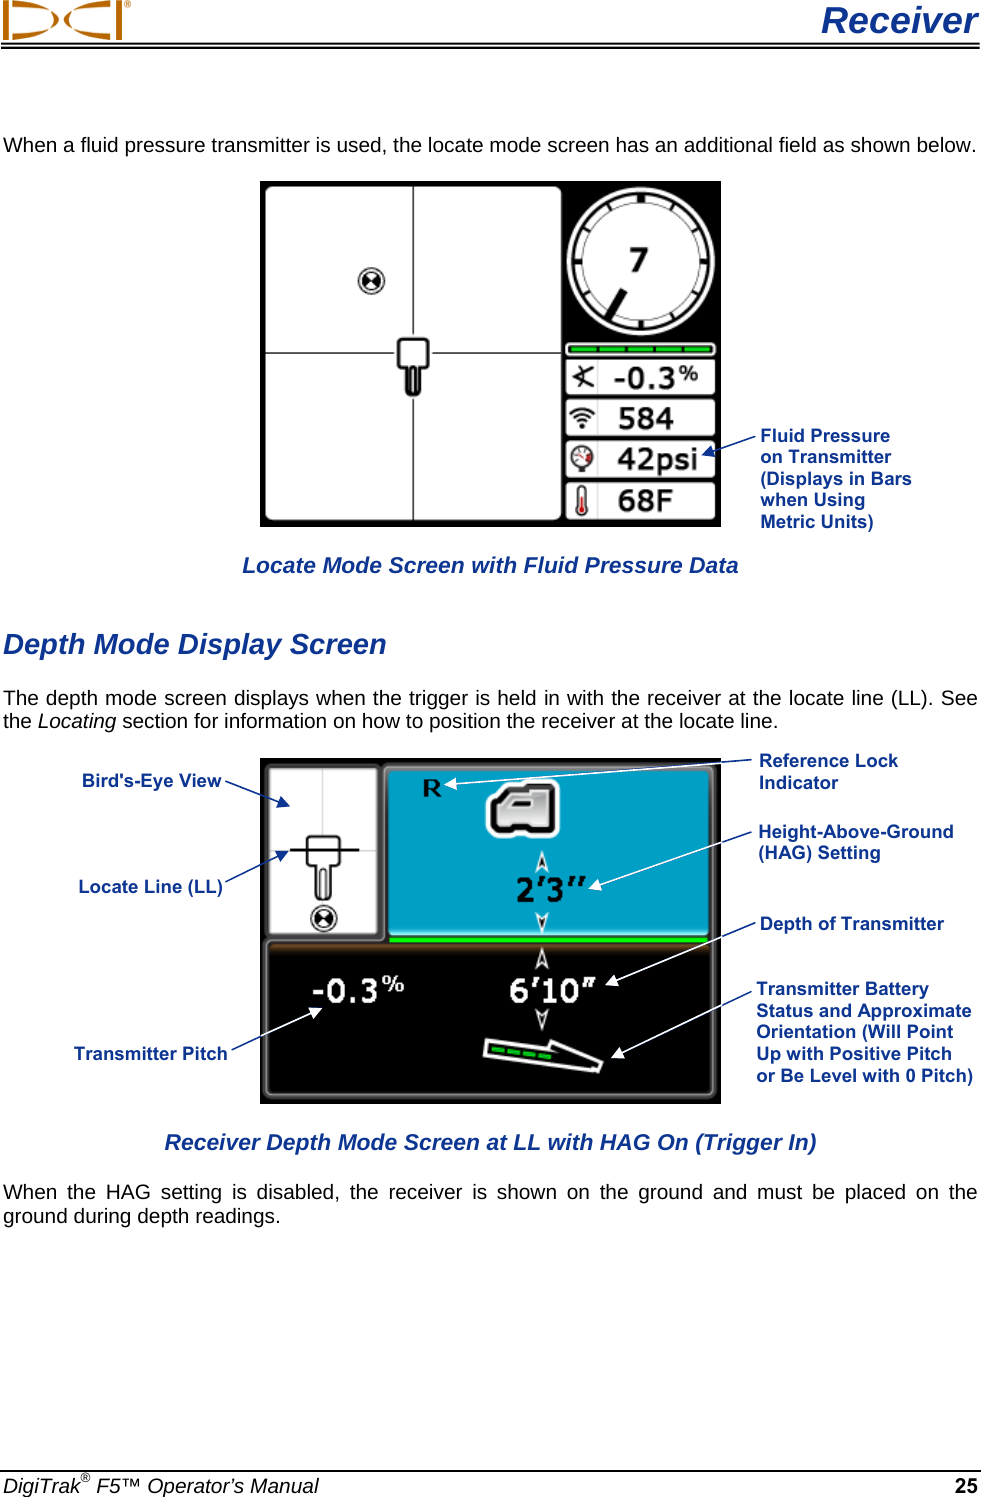  Receiver DigiTrak® F5™ Operator’s Manual 25 When a fluid pressure transmitter is used, the locate mode screen has an additional field as shown below.  Locate Mode Screen with Fluid Pressure Data  Depth Mode Display Screen The depth mode screen displays when the trigger is held in with the receiver at the locate line (LL). See the Locating section for information on how to position the receiver at the locate line.   Receiver Depth Mode Screen at LL with HAG On (Trigger In) When the HAG setting is disabled, the receiver is shown on the ground and must be placed on the ground during depth readings.  Height-Above-Ground (HAG) Setting  Locate Line (LL) Depth of TransmitterTransmitter Pitch  Bird&apos;s-Eye View Transmitter Battery Status and Approximate Orientation (Will Point Up with Positive Pitch or Be Level with 0 Pitch)  Reference Lock Indicator  Fluid Pressure on Transmitter (Displays in Bars when Using Metric Units) 